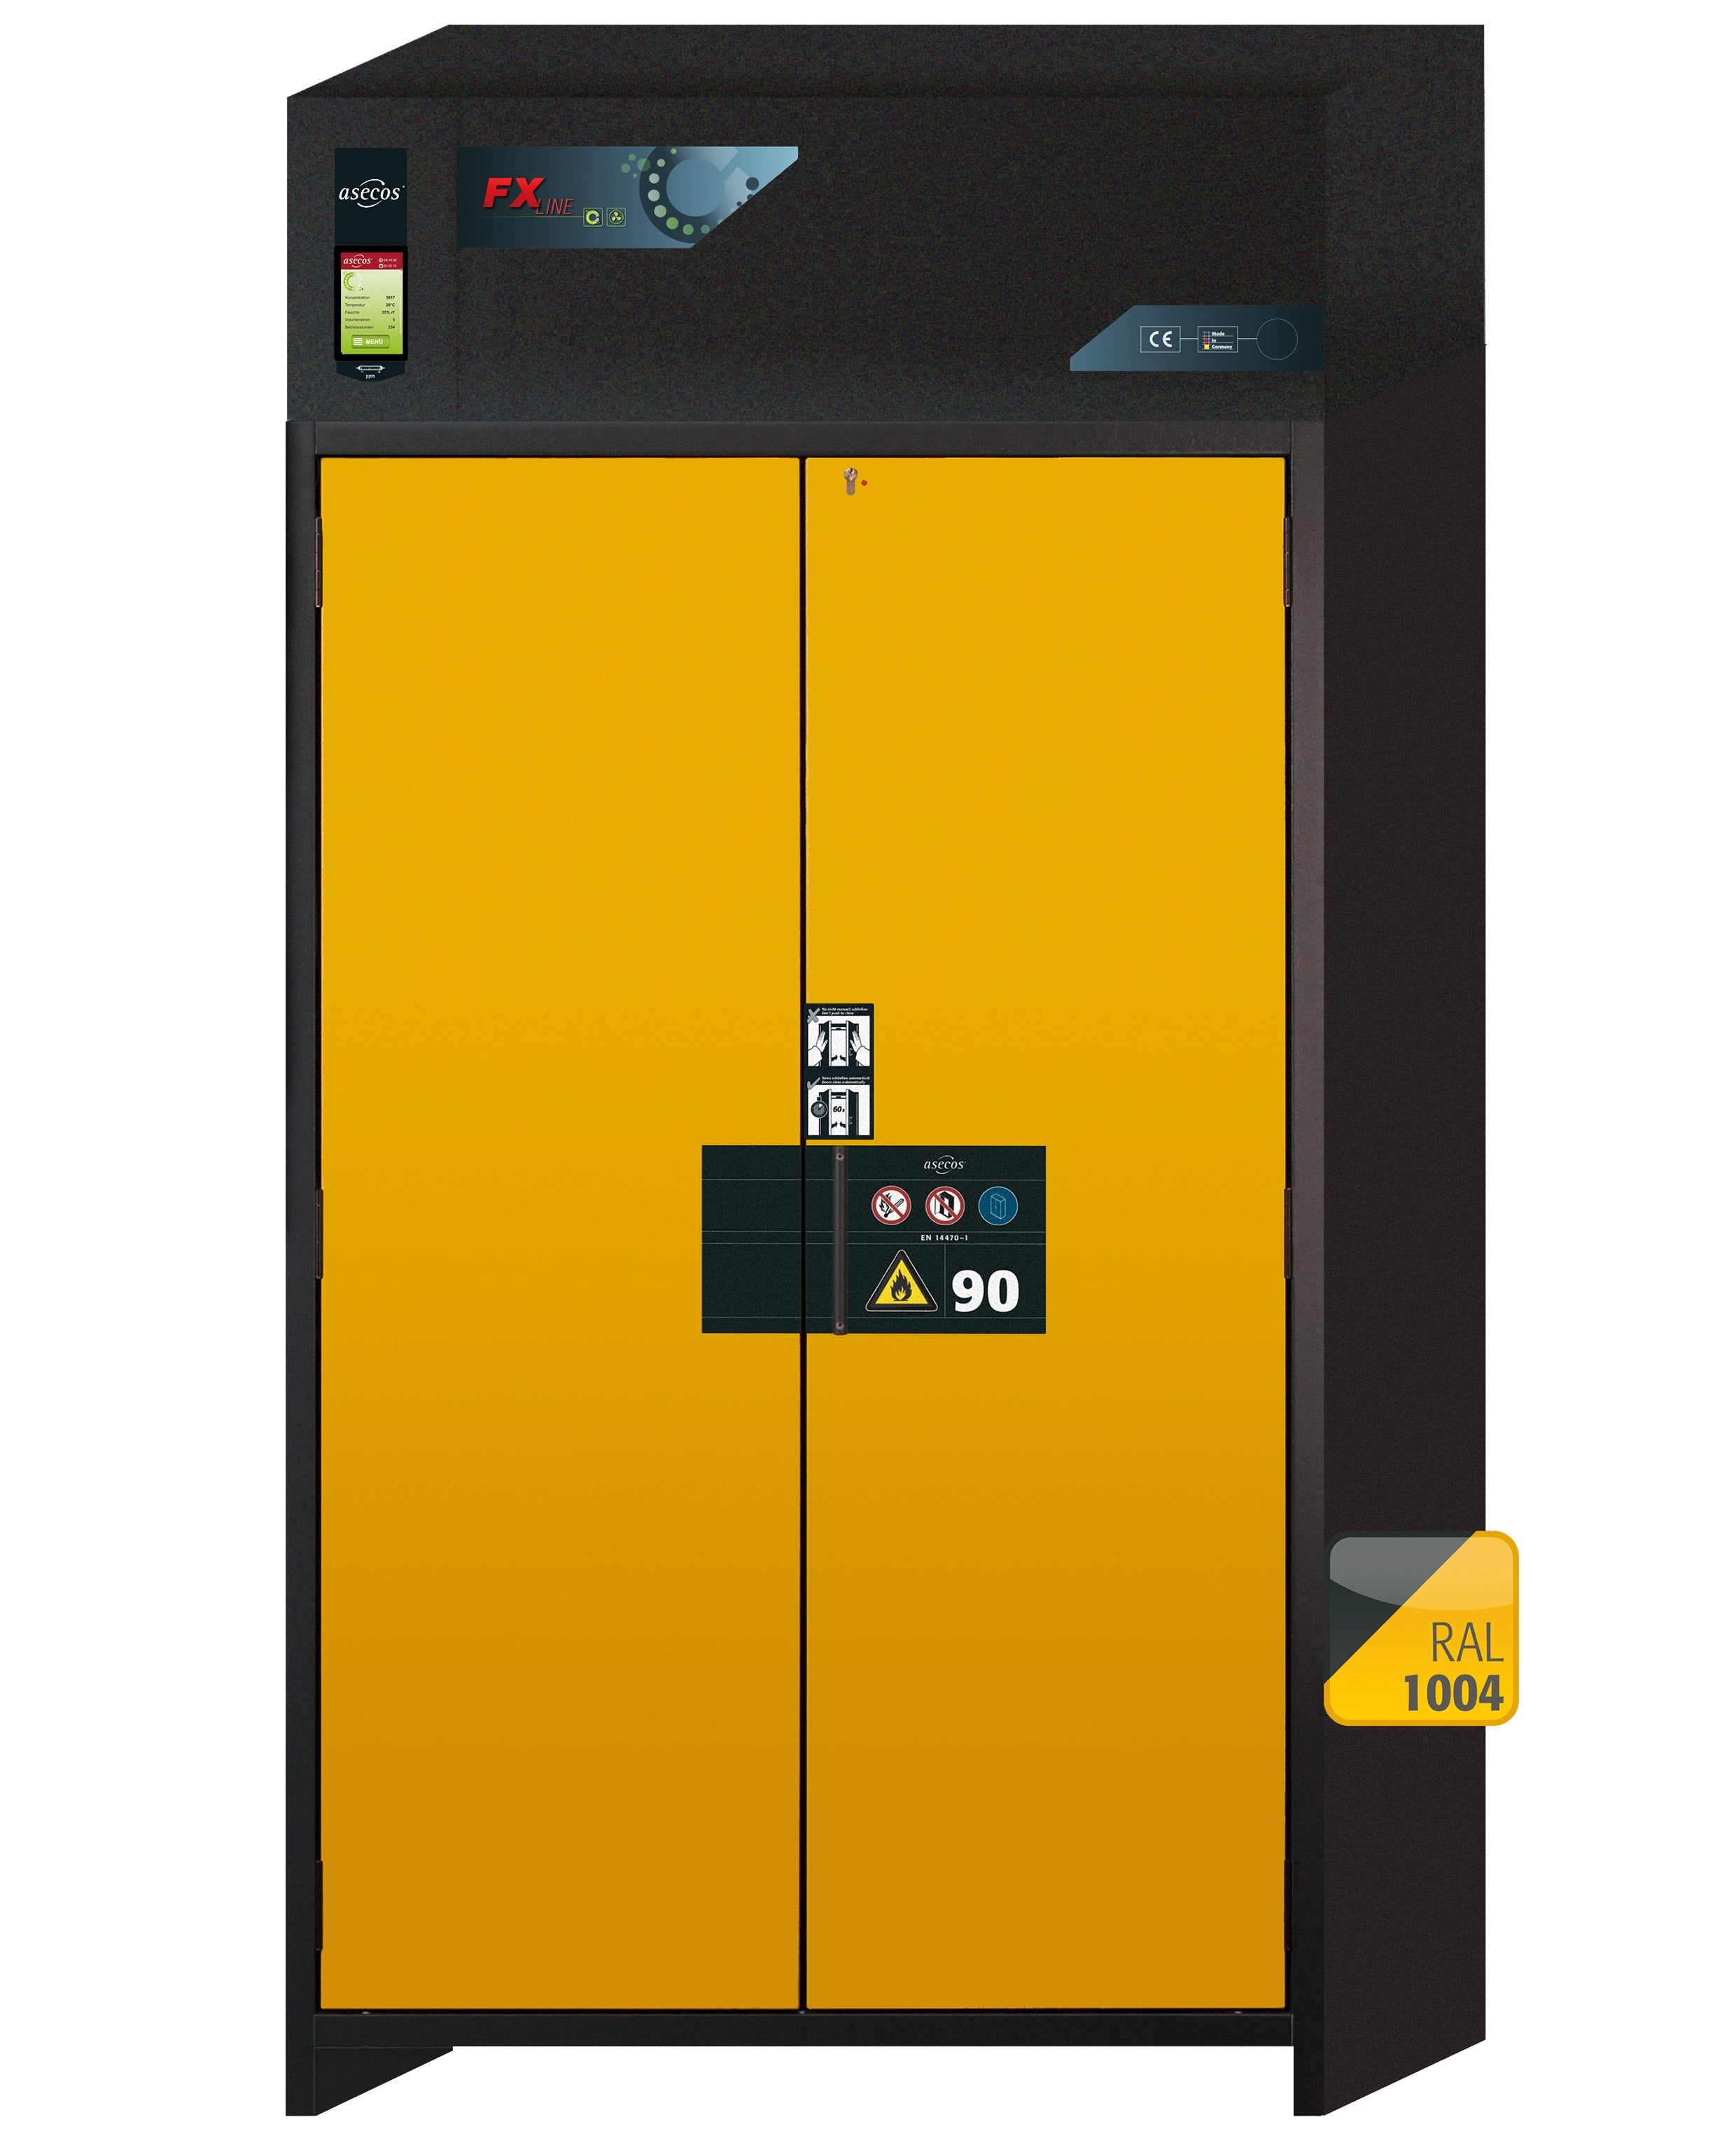 Type 90 recirculating air filter cabinet FX-PEGASUS-90 model FX90.229.120.WDAC in safety yellow RAL 1004 with 6x standard pull-out tray (sheet steel)